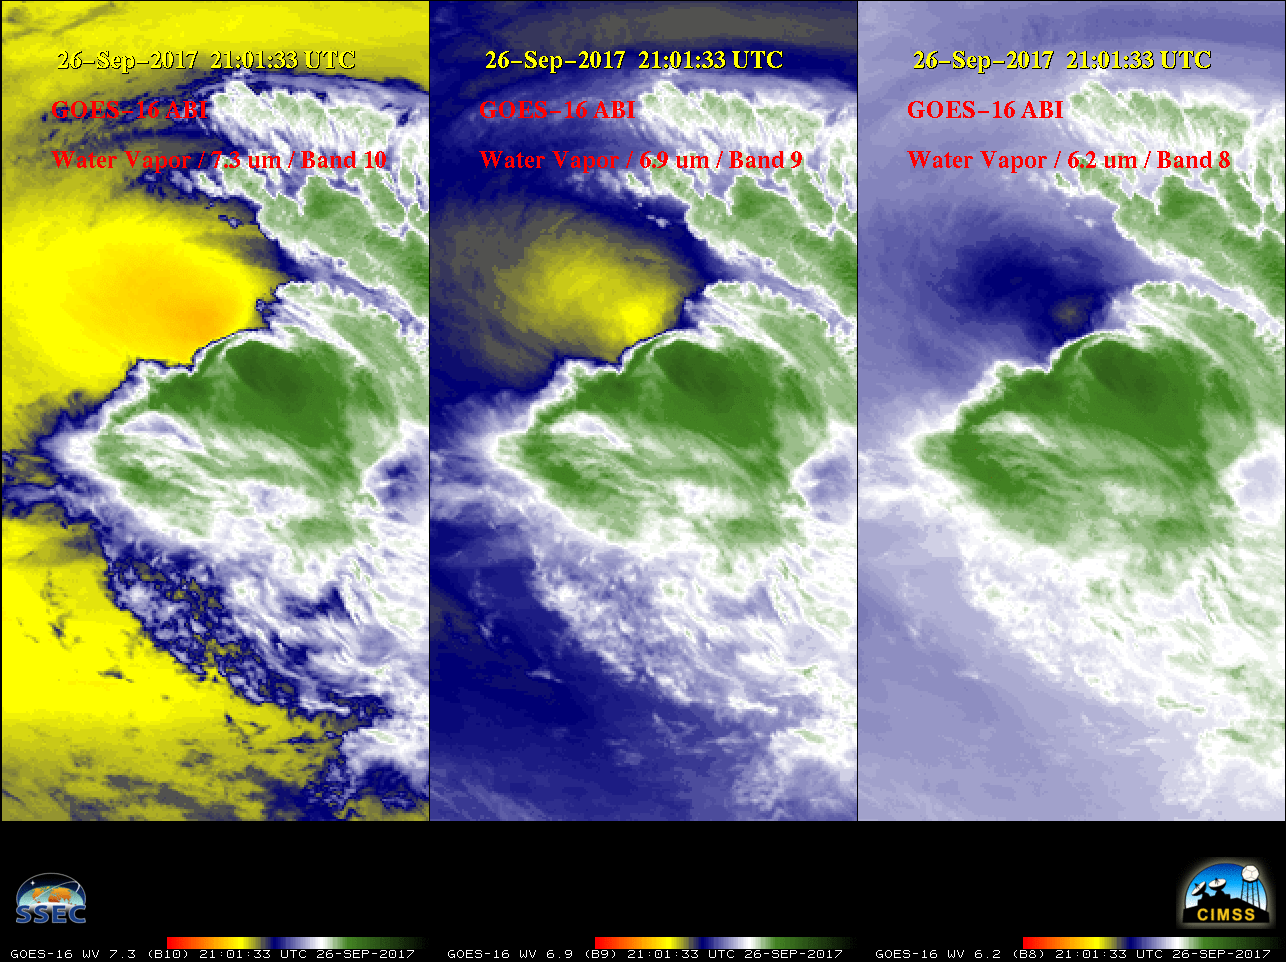 GOES-16 Lower-level (7.3 µm), Mid-level (6.9 µm) and Upper-level (6.2 µm) Water Vapor images [click to play MP4 animation]